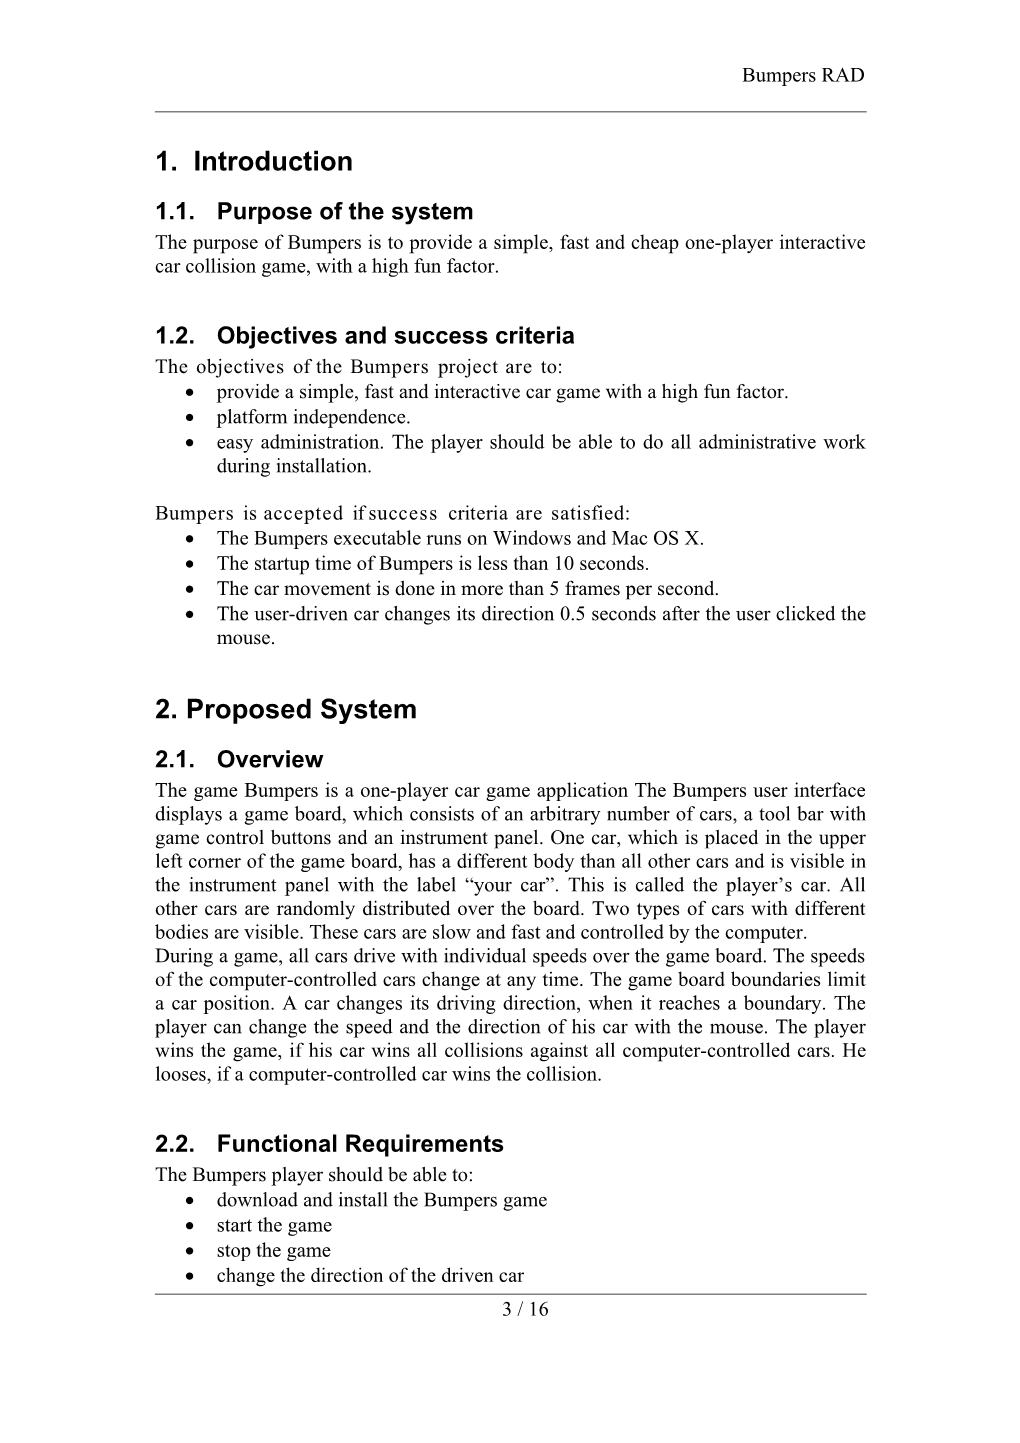 Bumpers Requirements Analysis Document (RAD)